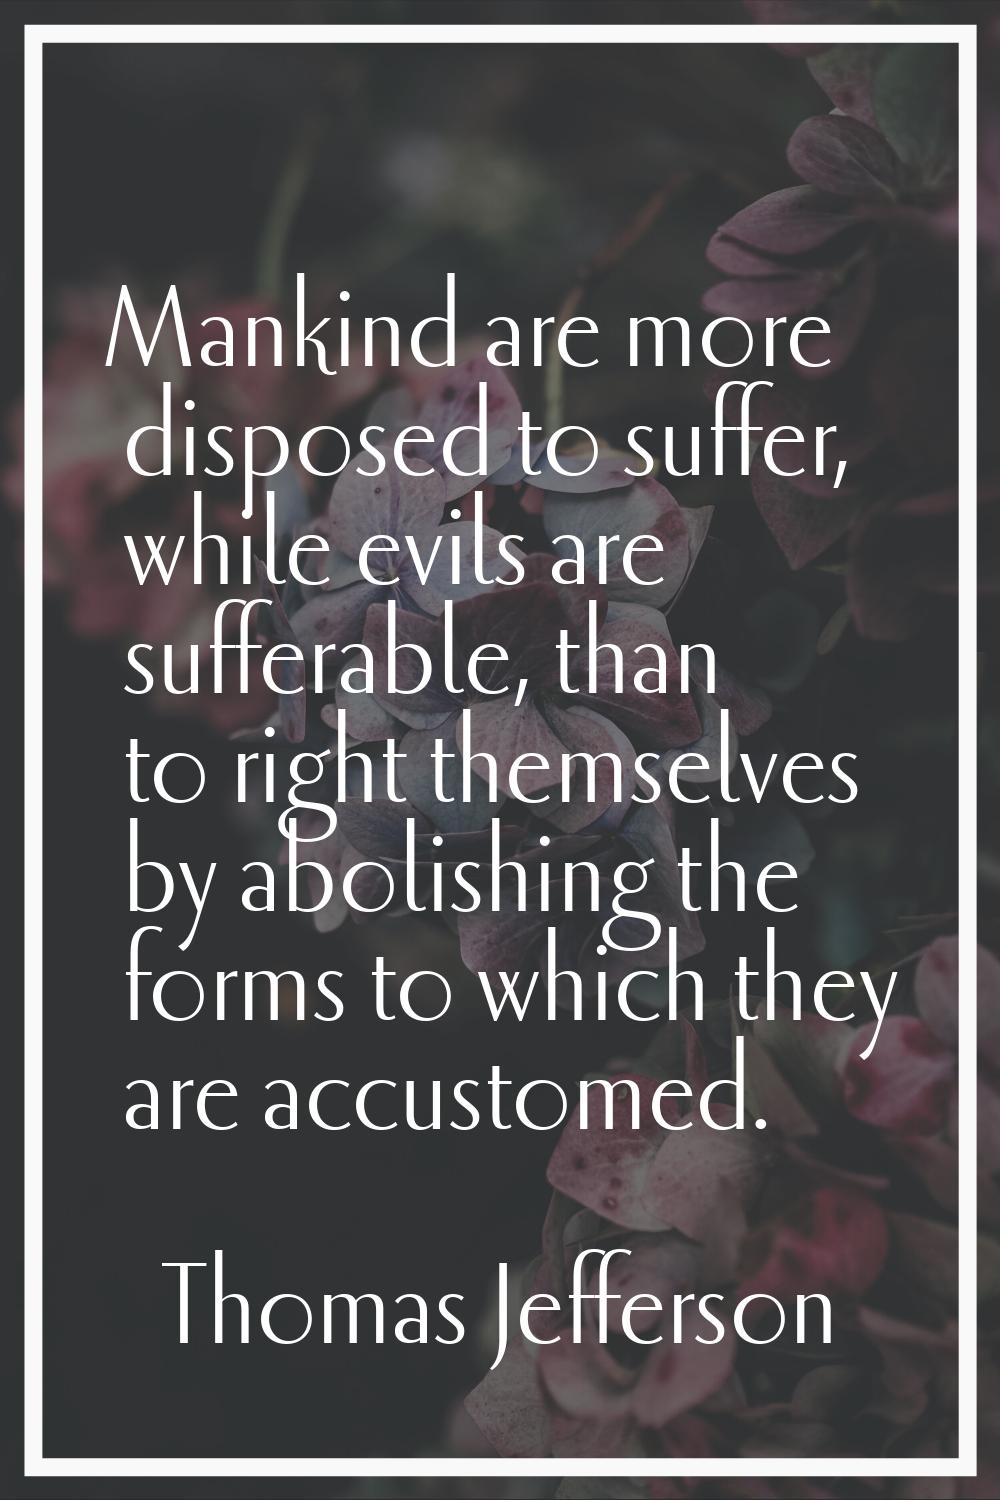 Mankind are more disposed to suffer, while evils are sufferable, than to right themselves by abolis